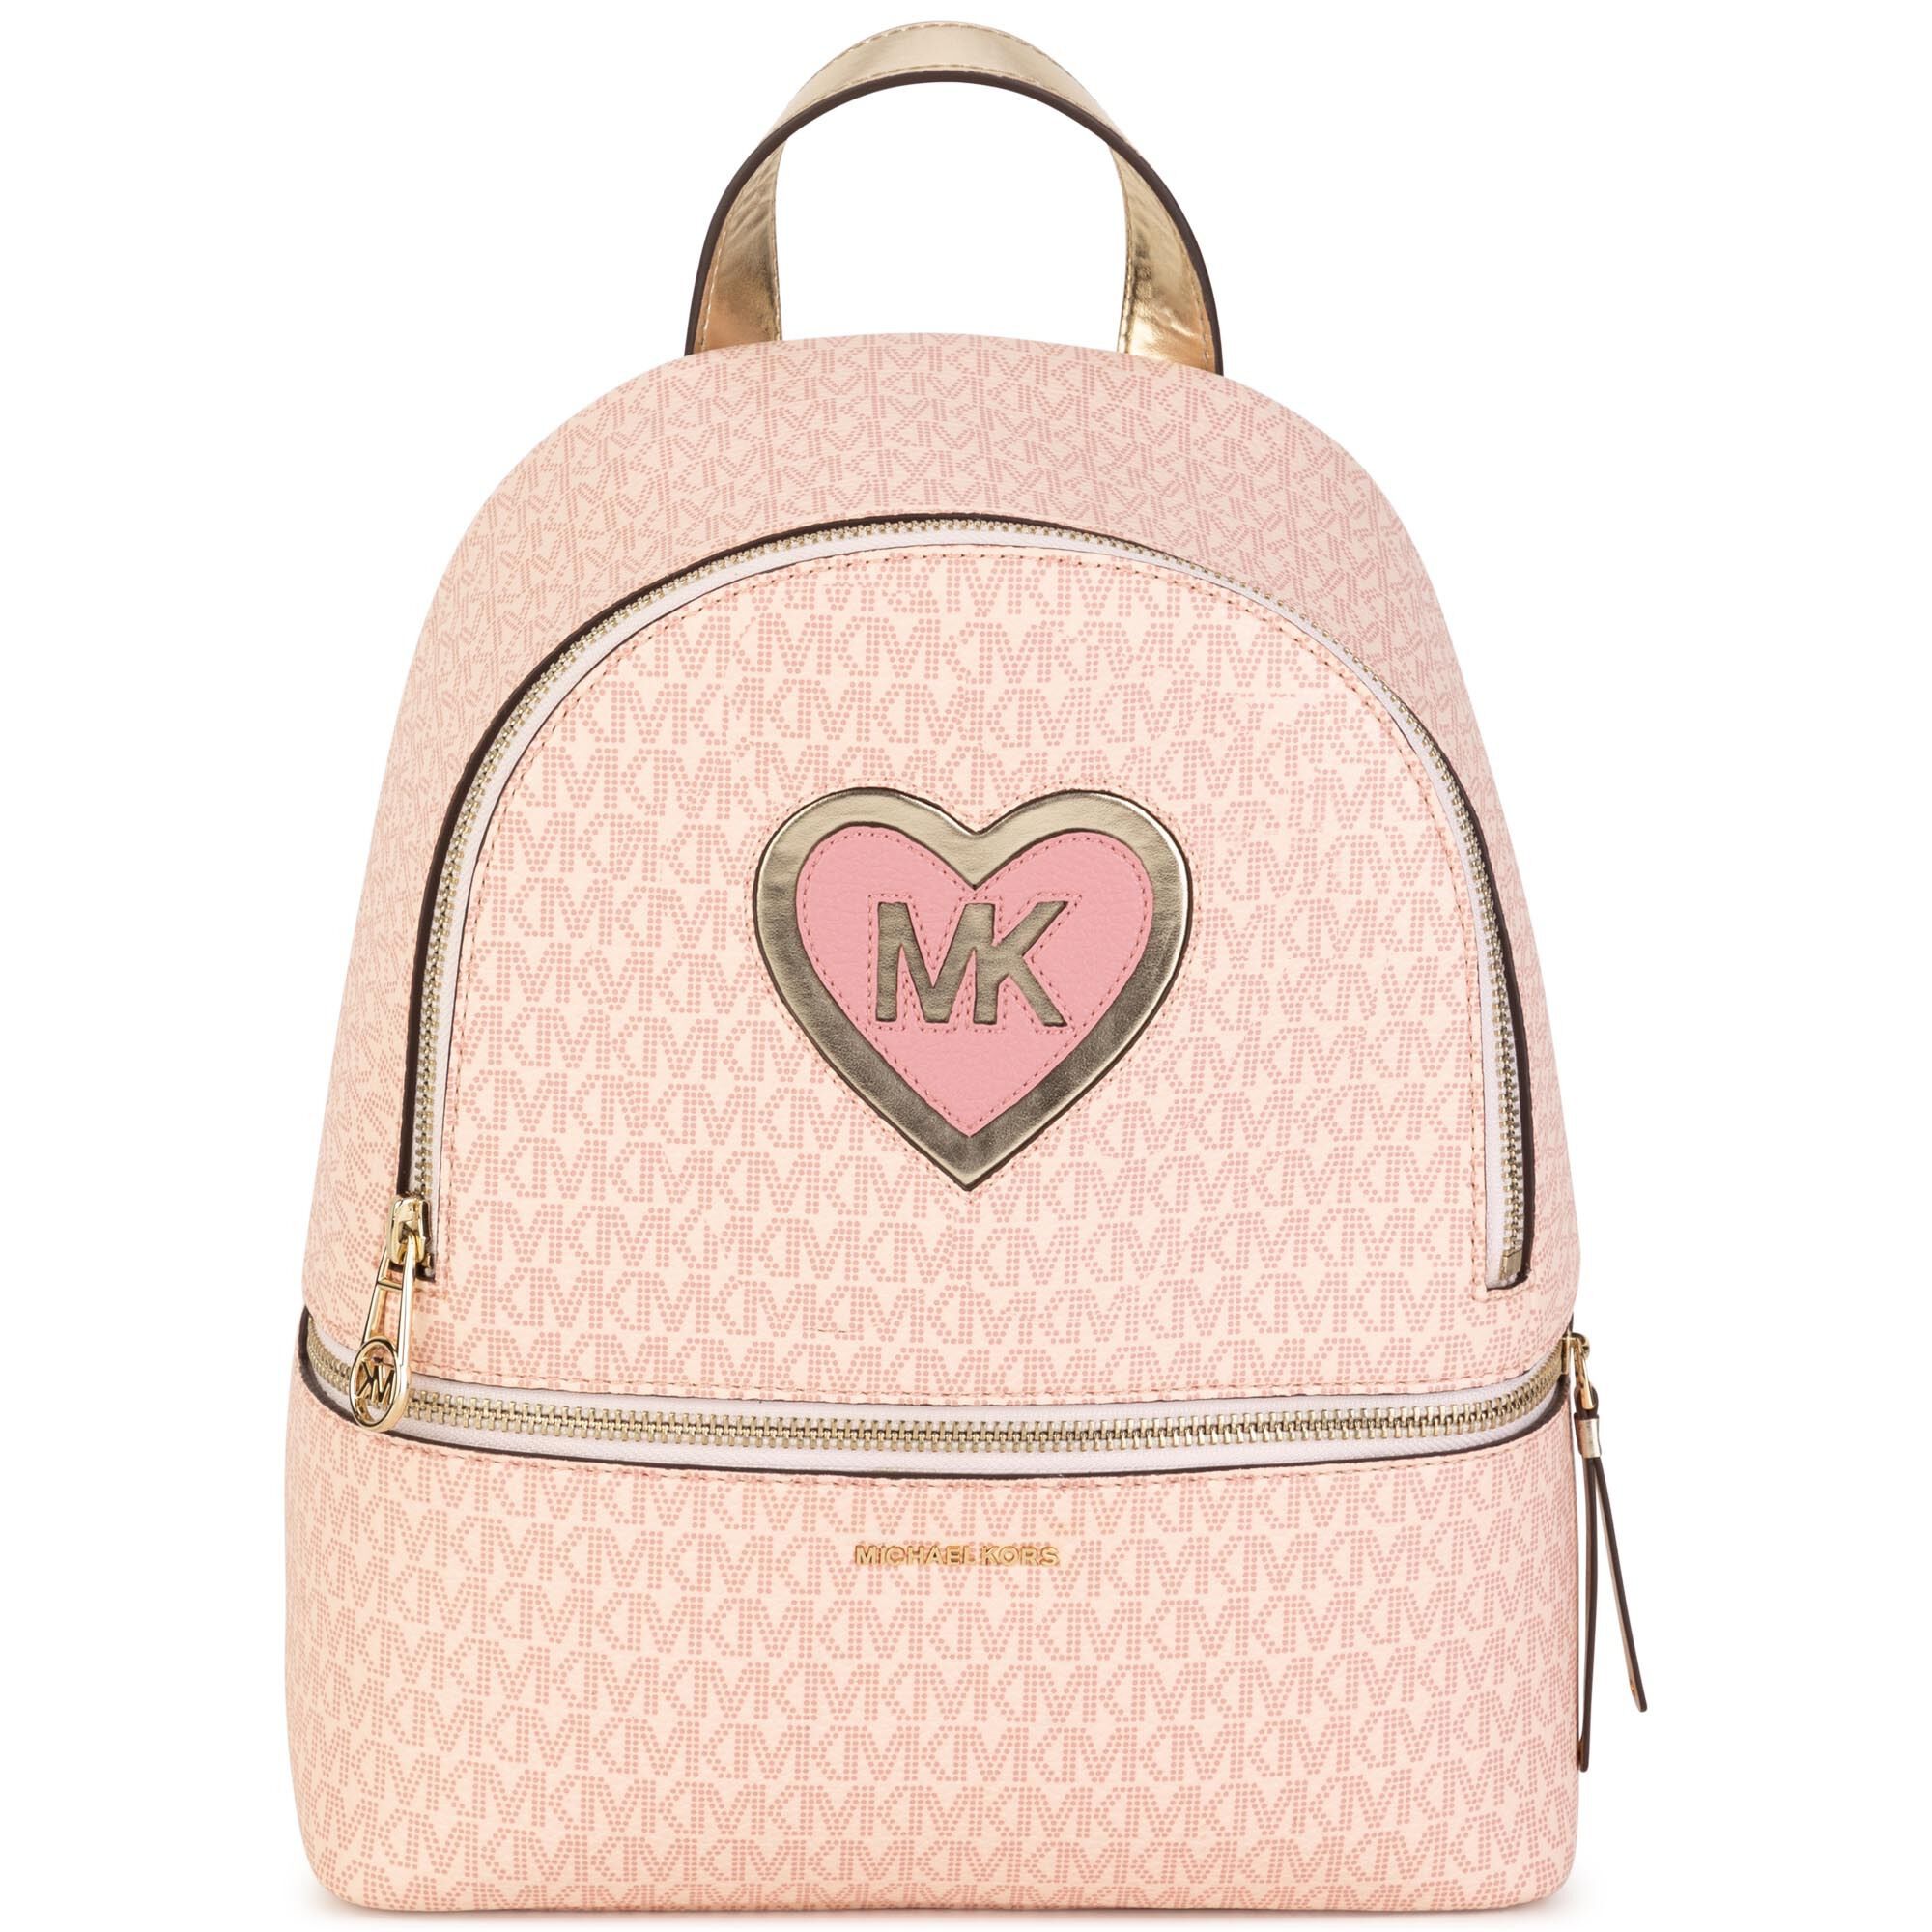 MICHAEL KORS backpack for woman  Pink